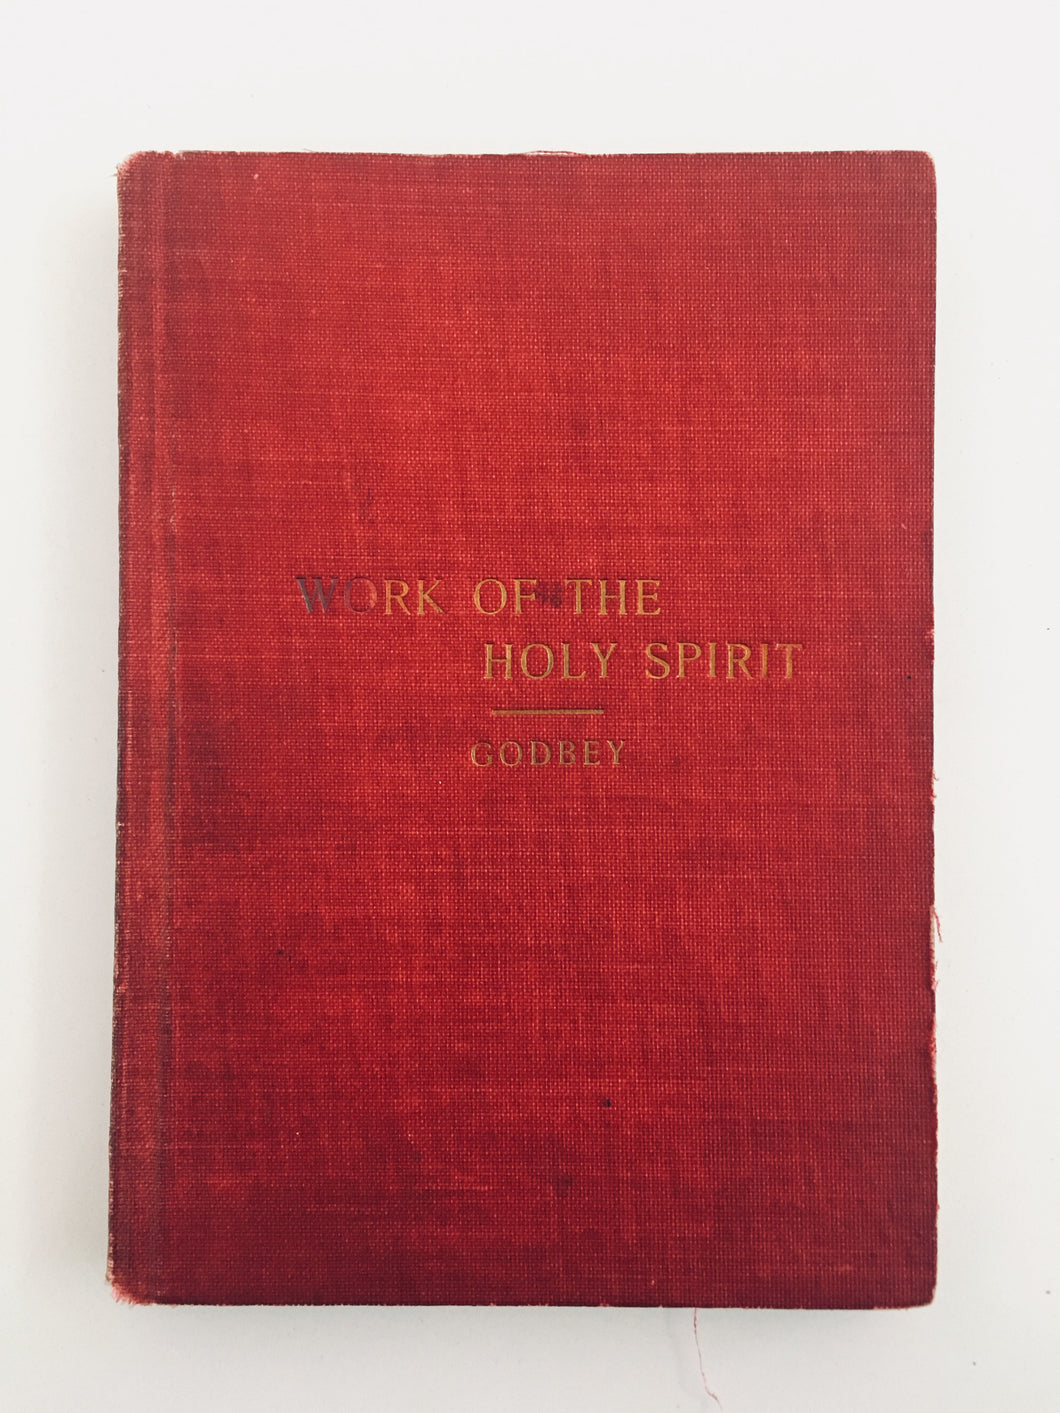 1902 W. B. GODBEY. Work of the Holy Spirit. Pentecostal - Holiness. Miracles.